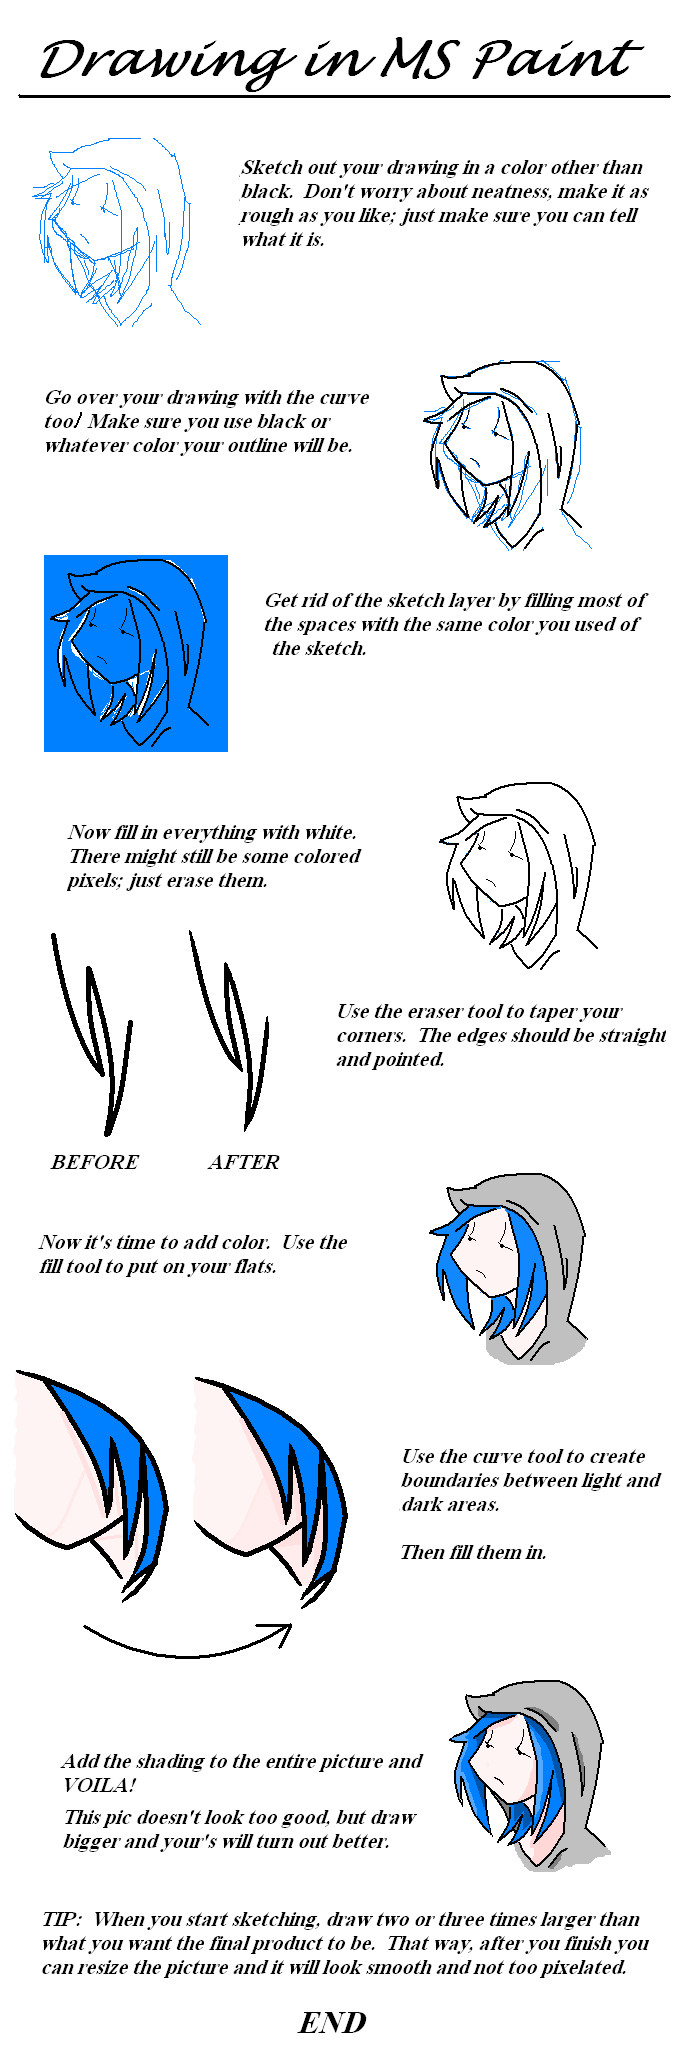 MS Paint Tutorial by Aprillyn